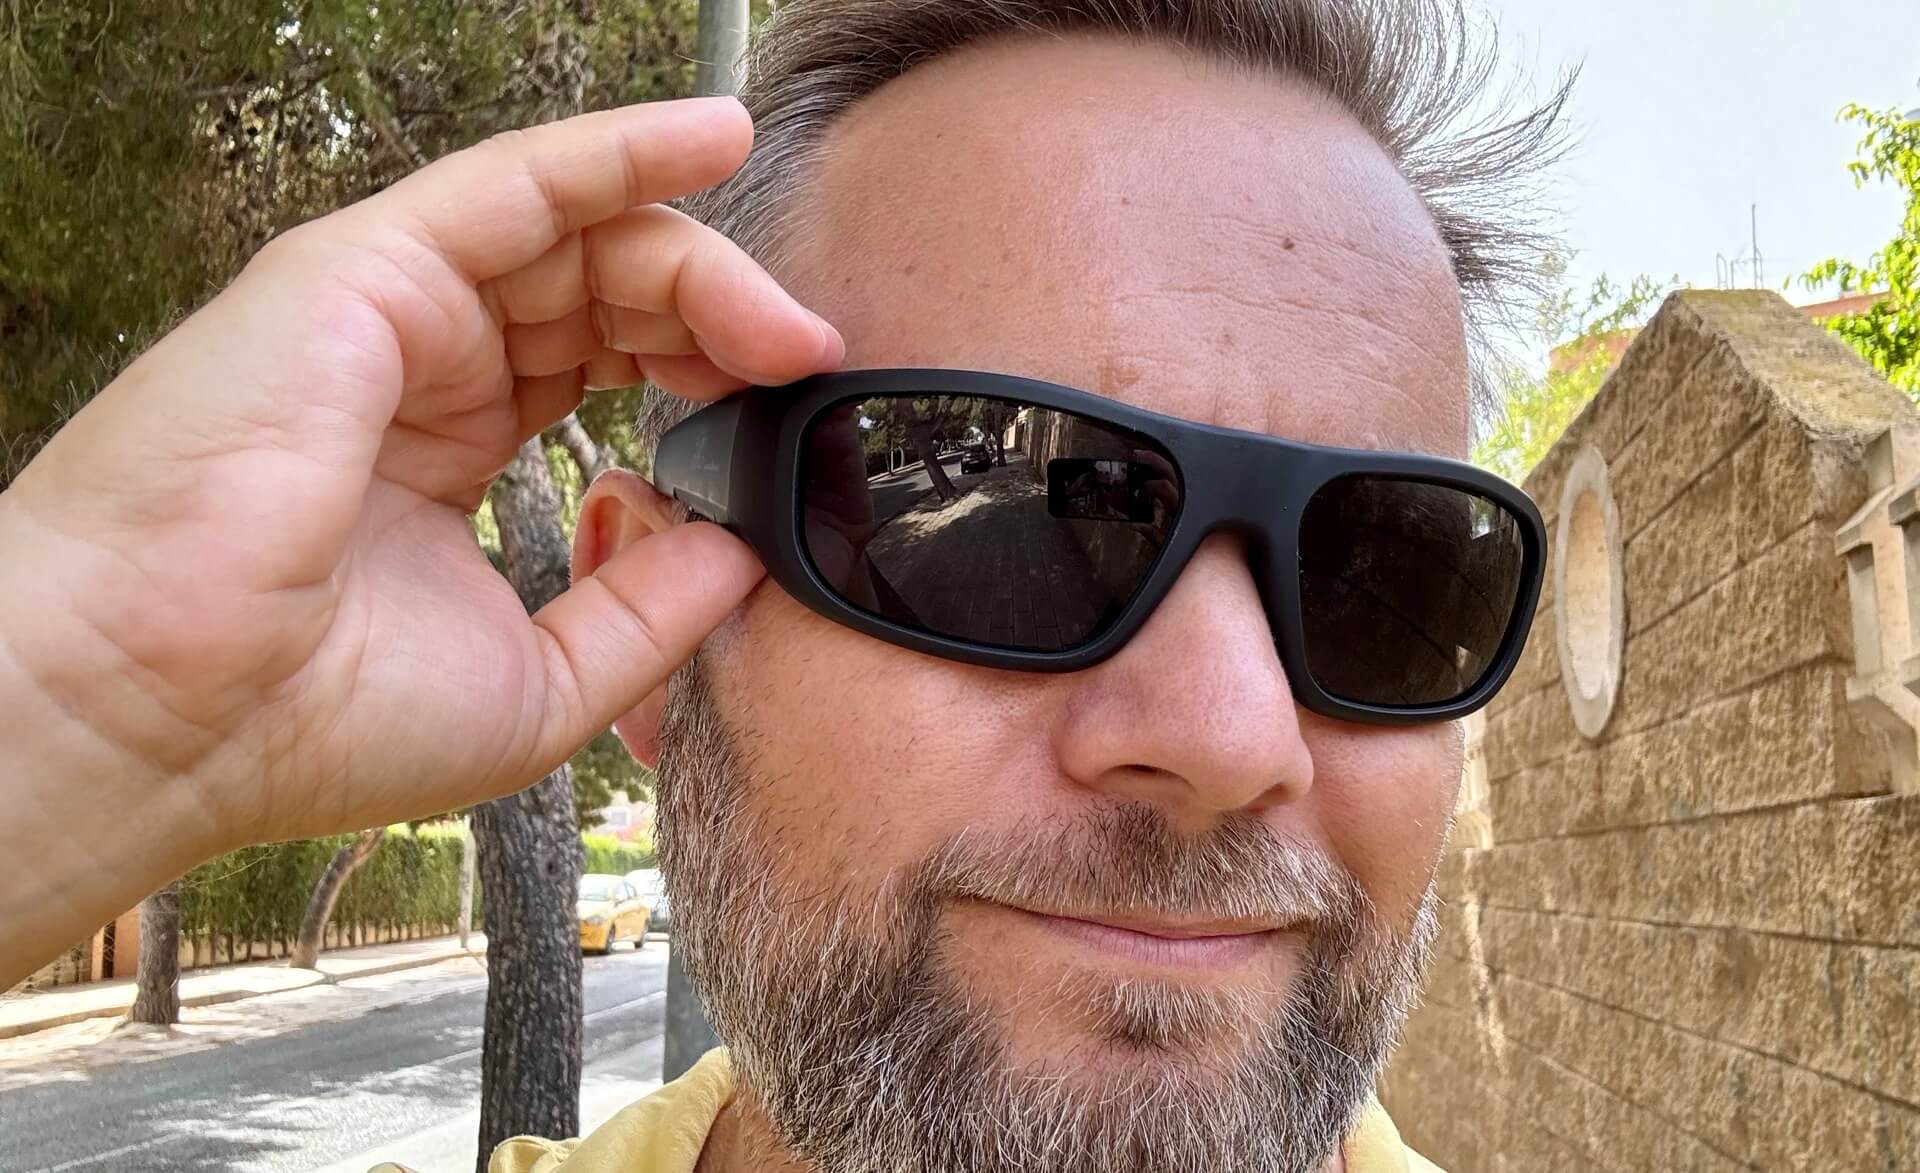 Get yourself Bluetooth sunglasses this summer!